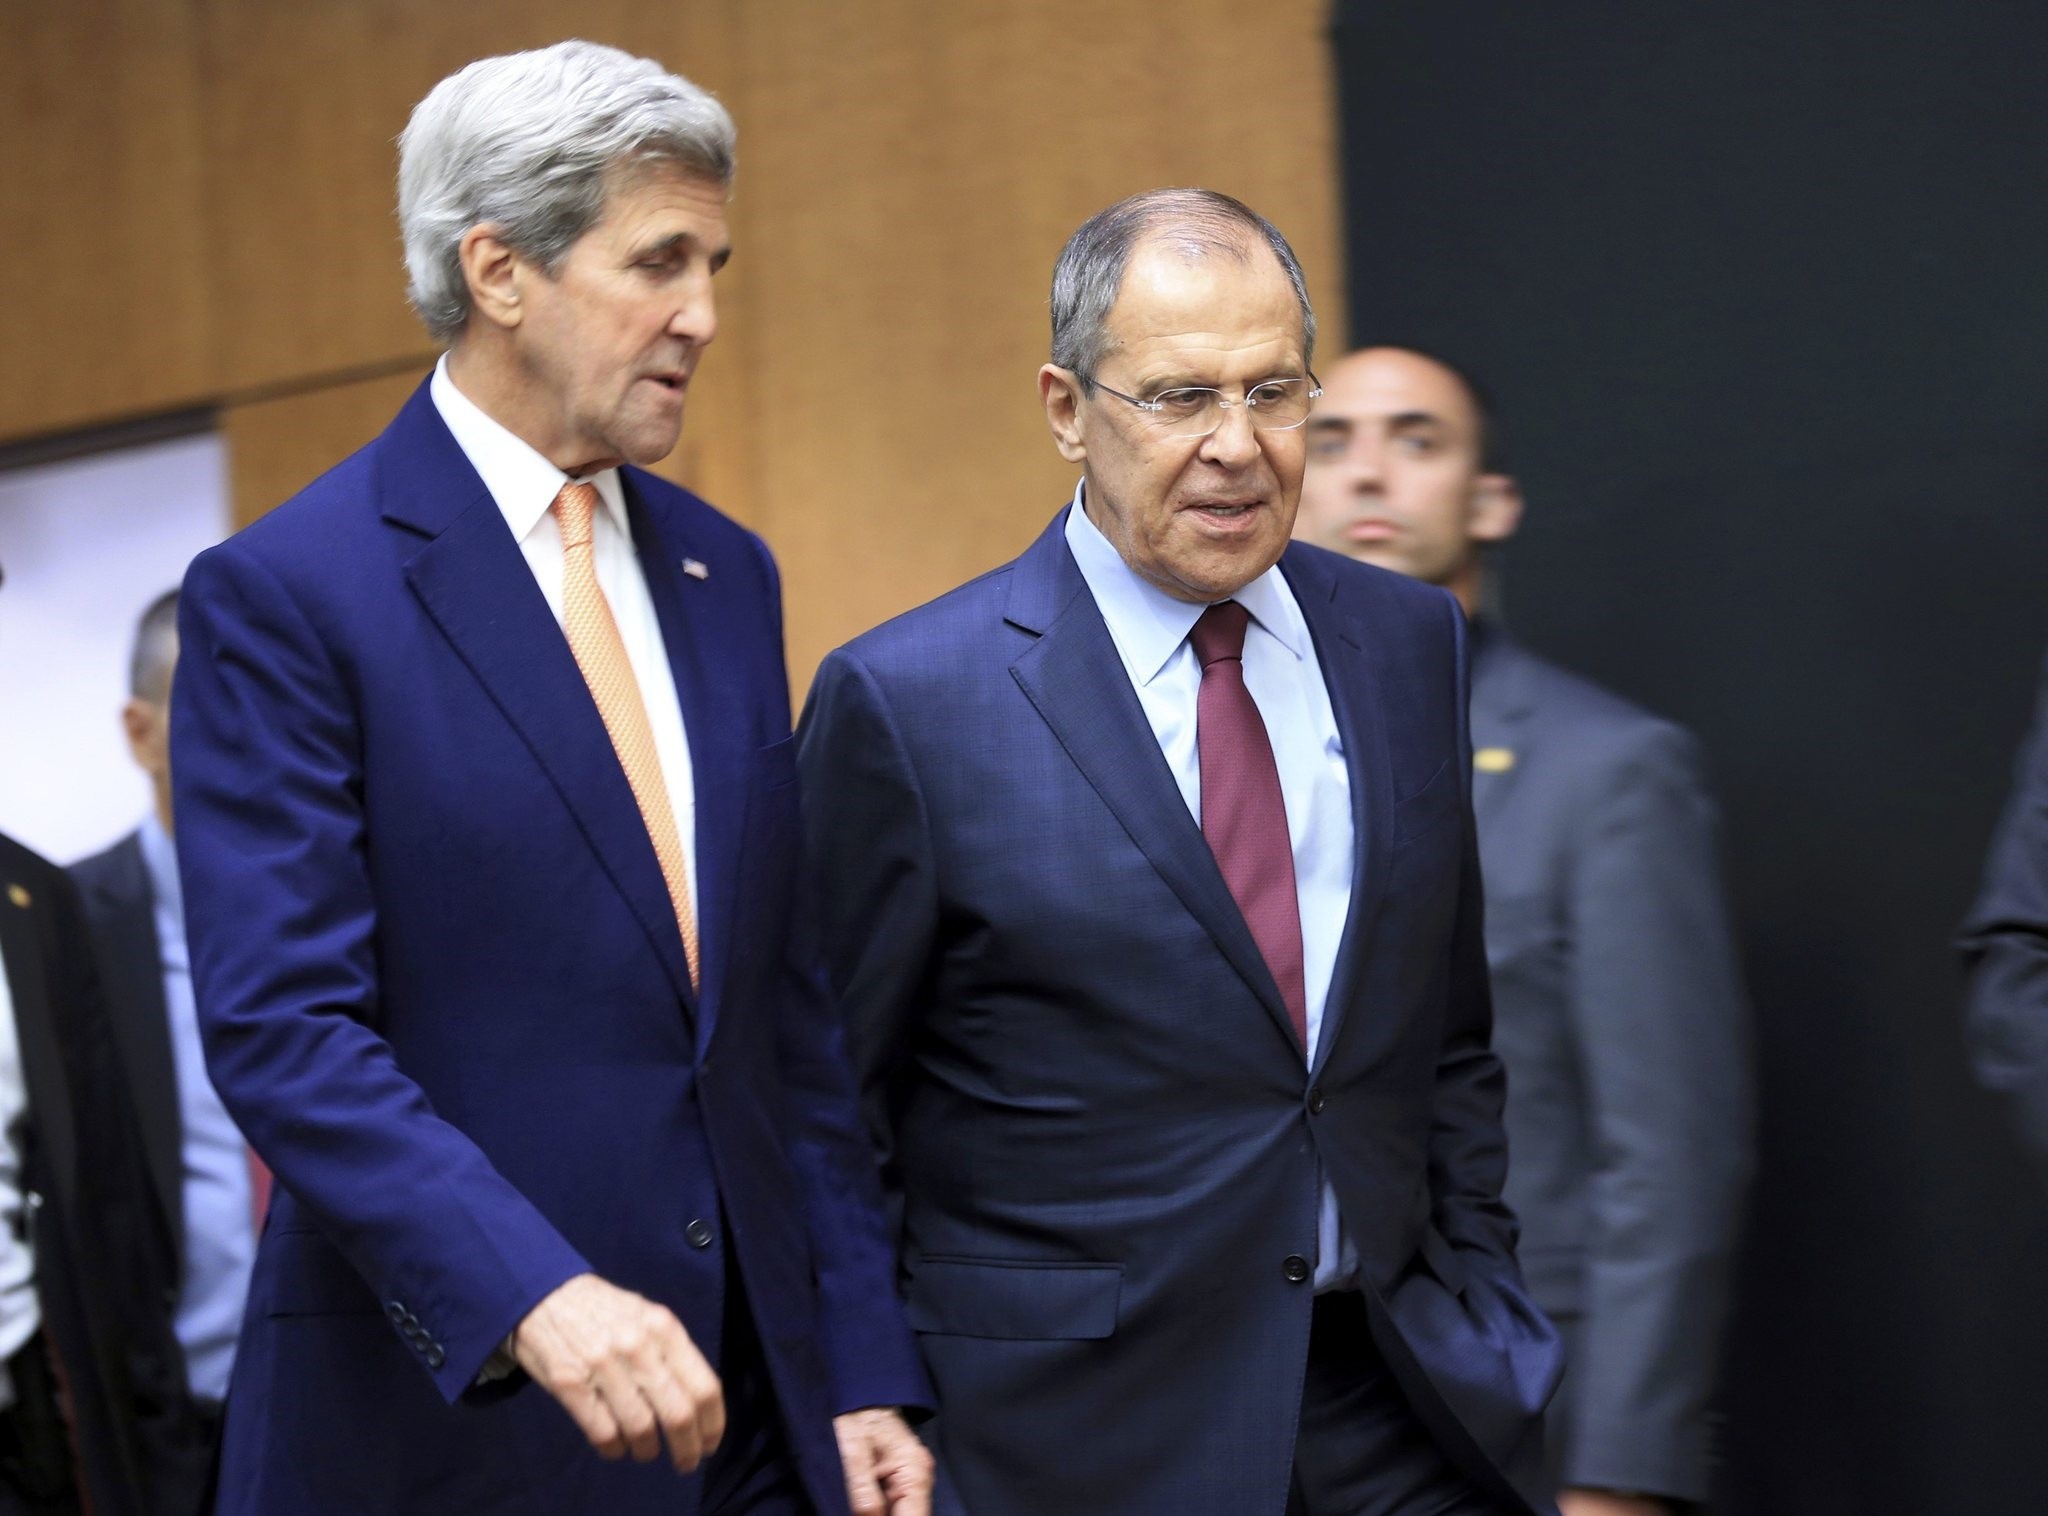 U.S. Secretary of State John Kerry (L) and Russian Foreign Minister Sergei Lavrov arrives for a news conference after a meeting on Syria in Geneva, Switzerland, August 26, 2016. )REUTERS Photo)